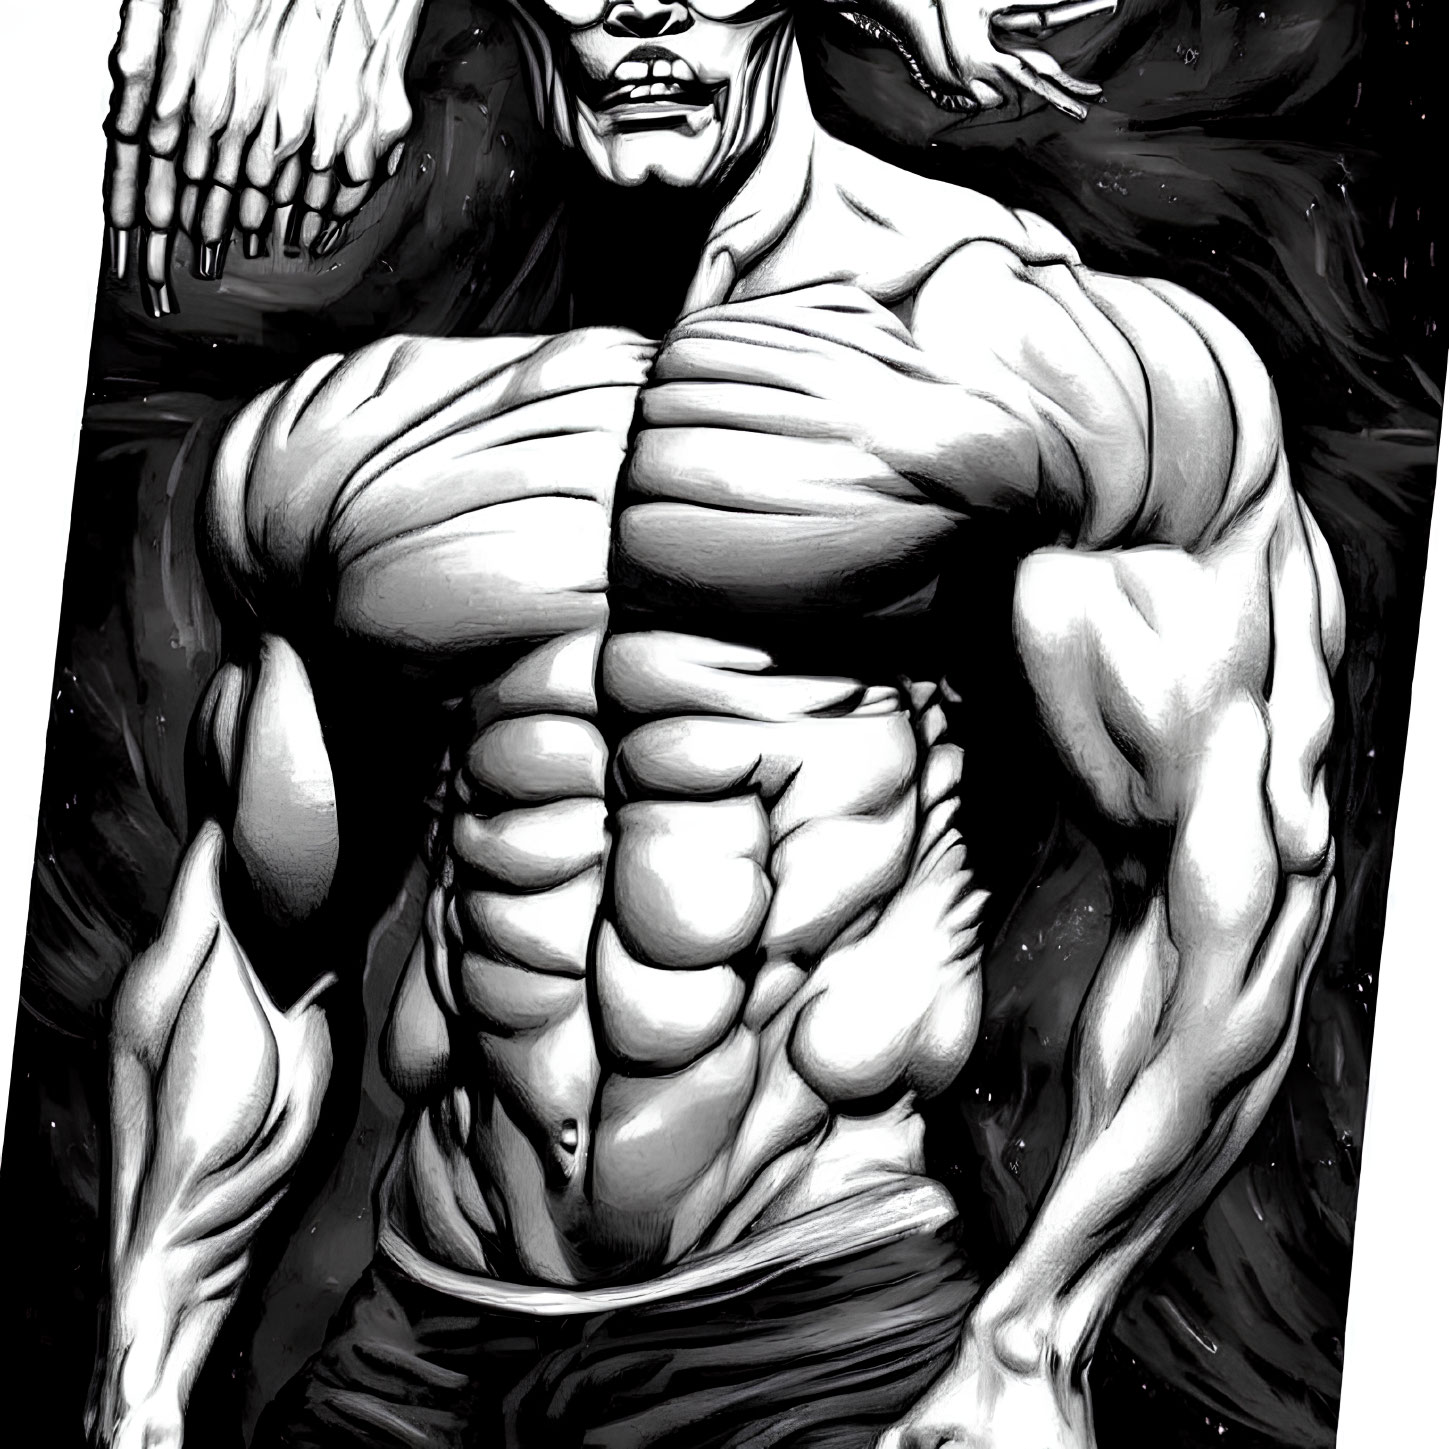 Muscular male figure in monochrome artwork with defined abs and shadows.